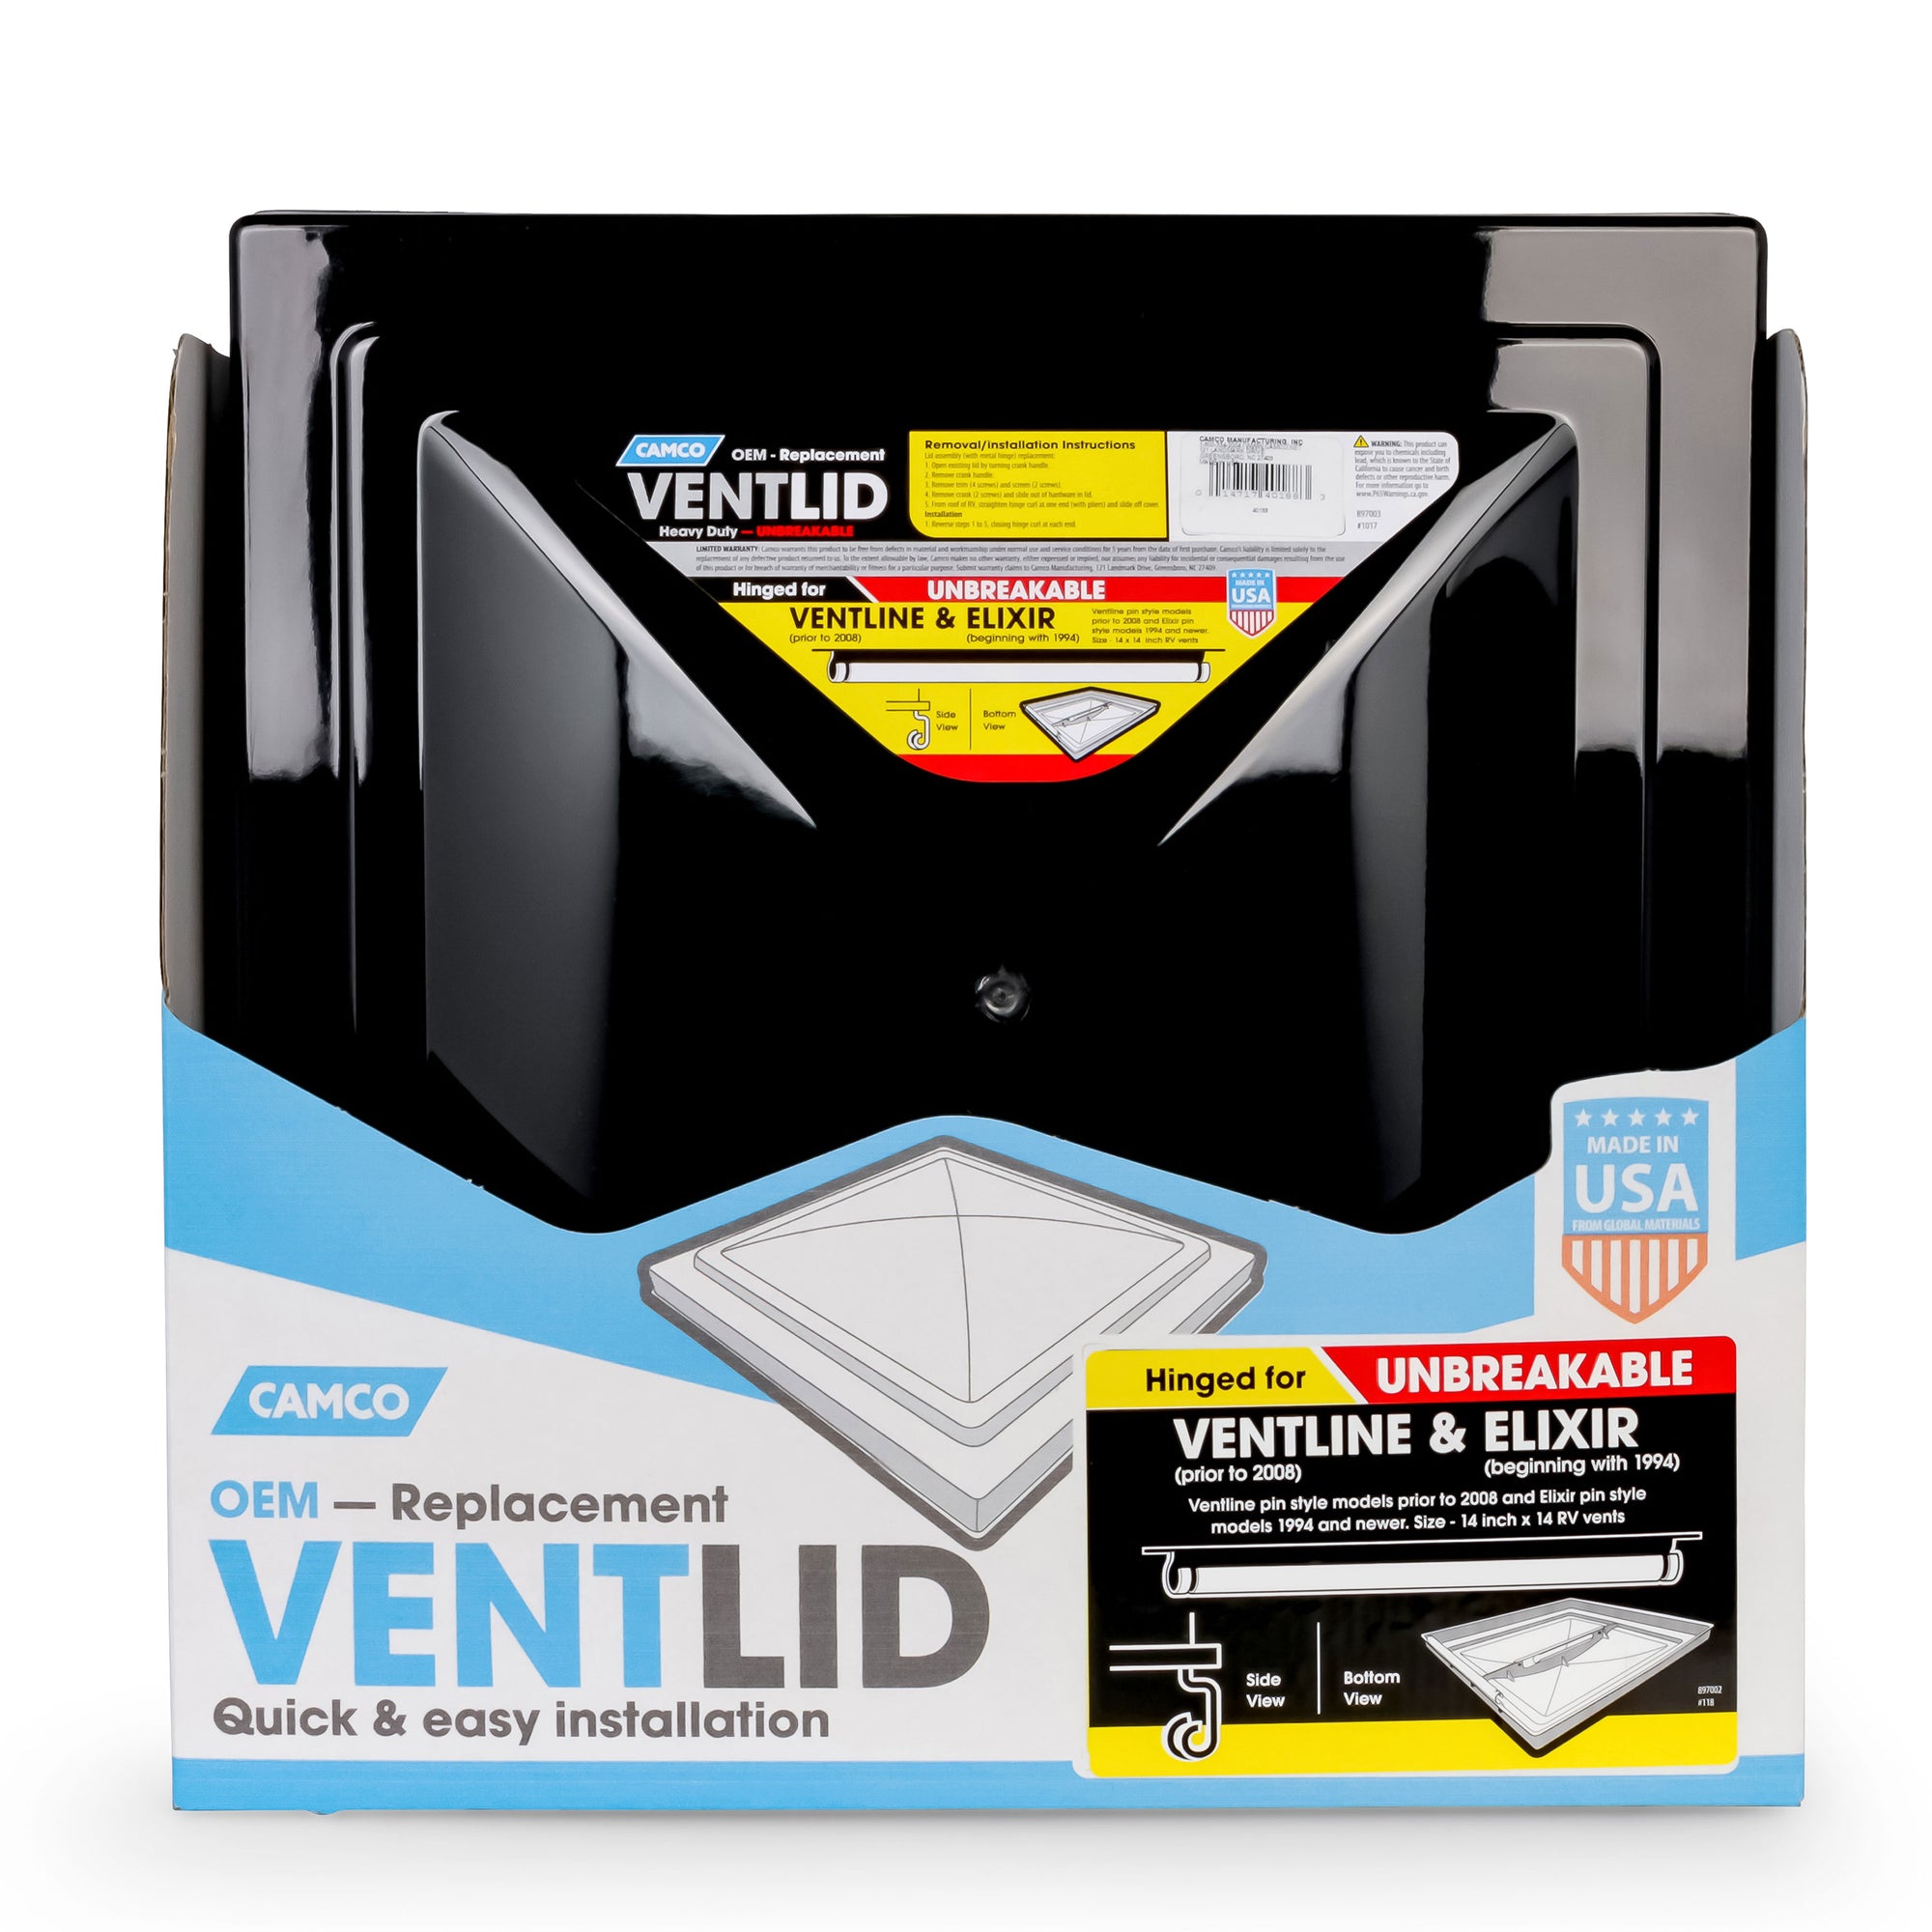 Camco 40188 Vent Lid Replacement for Pre-2008 Ventline Models